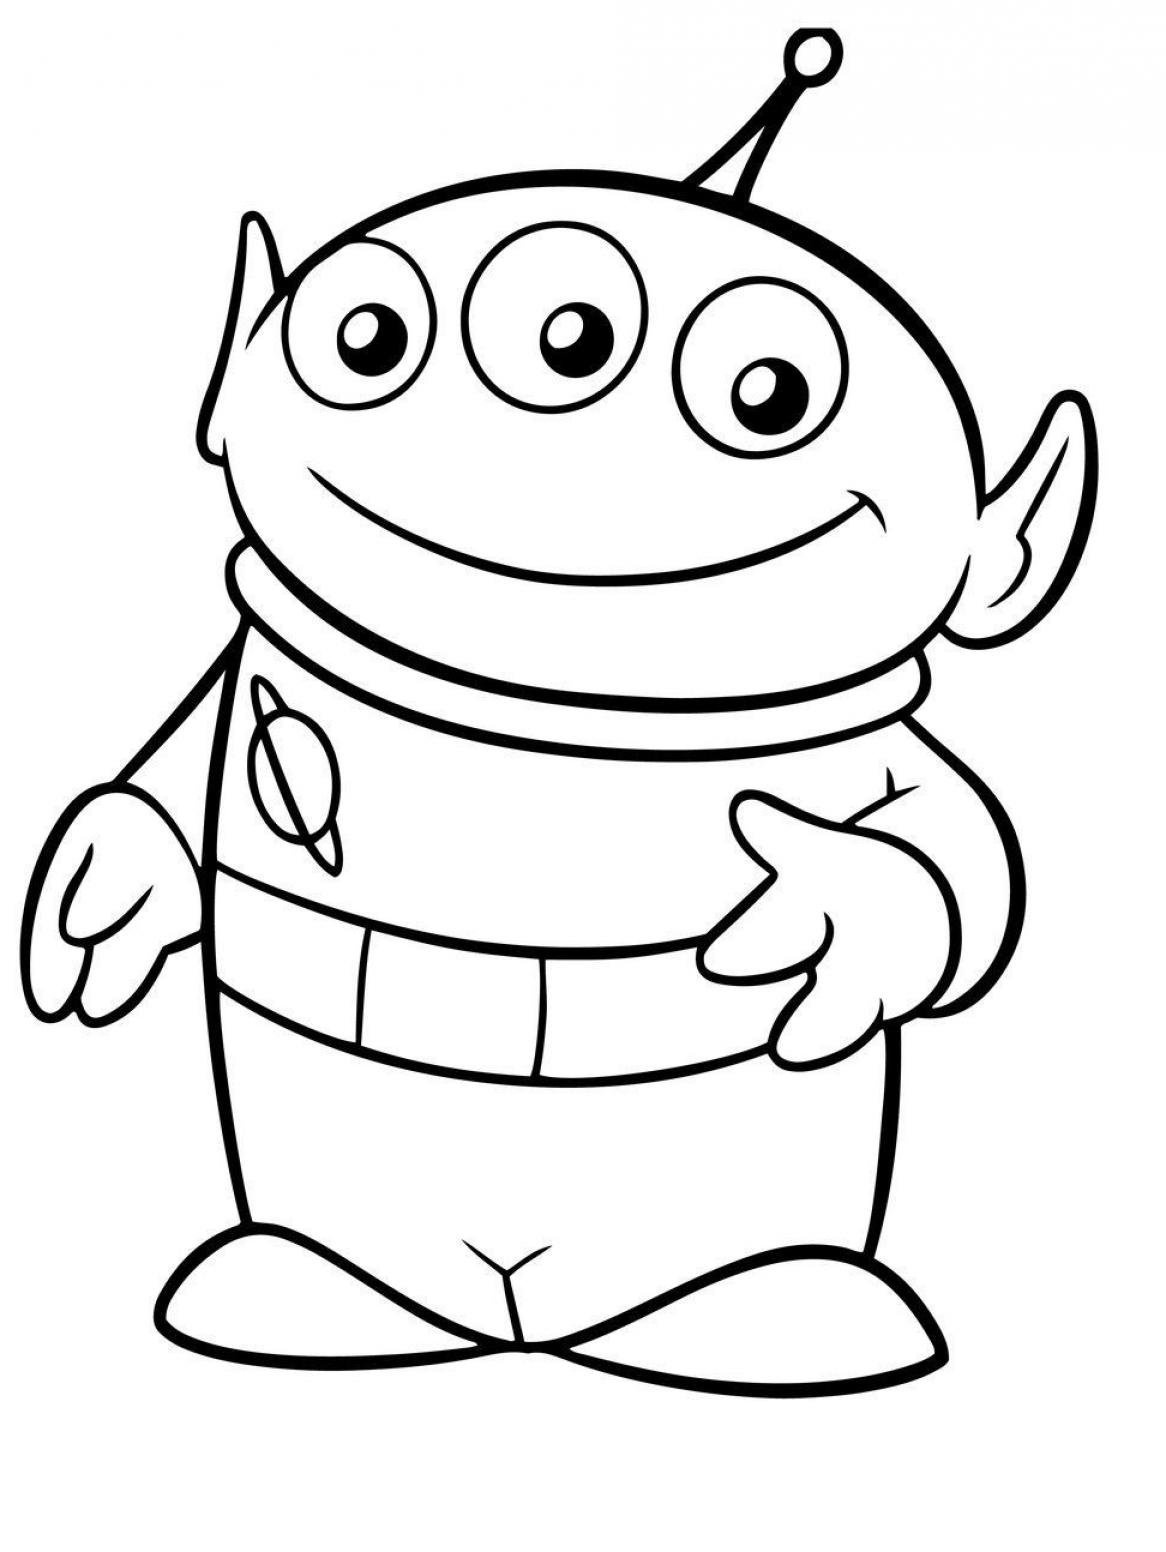 Toy Story Aliens Coloring Pages to Print - SheetalColor.com